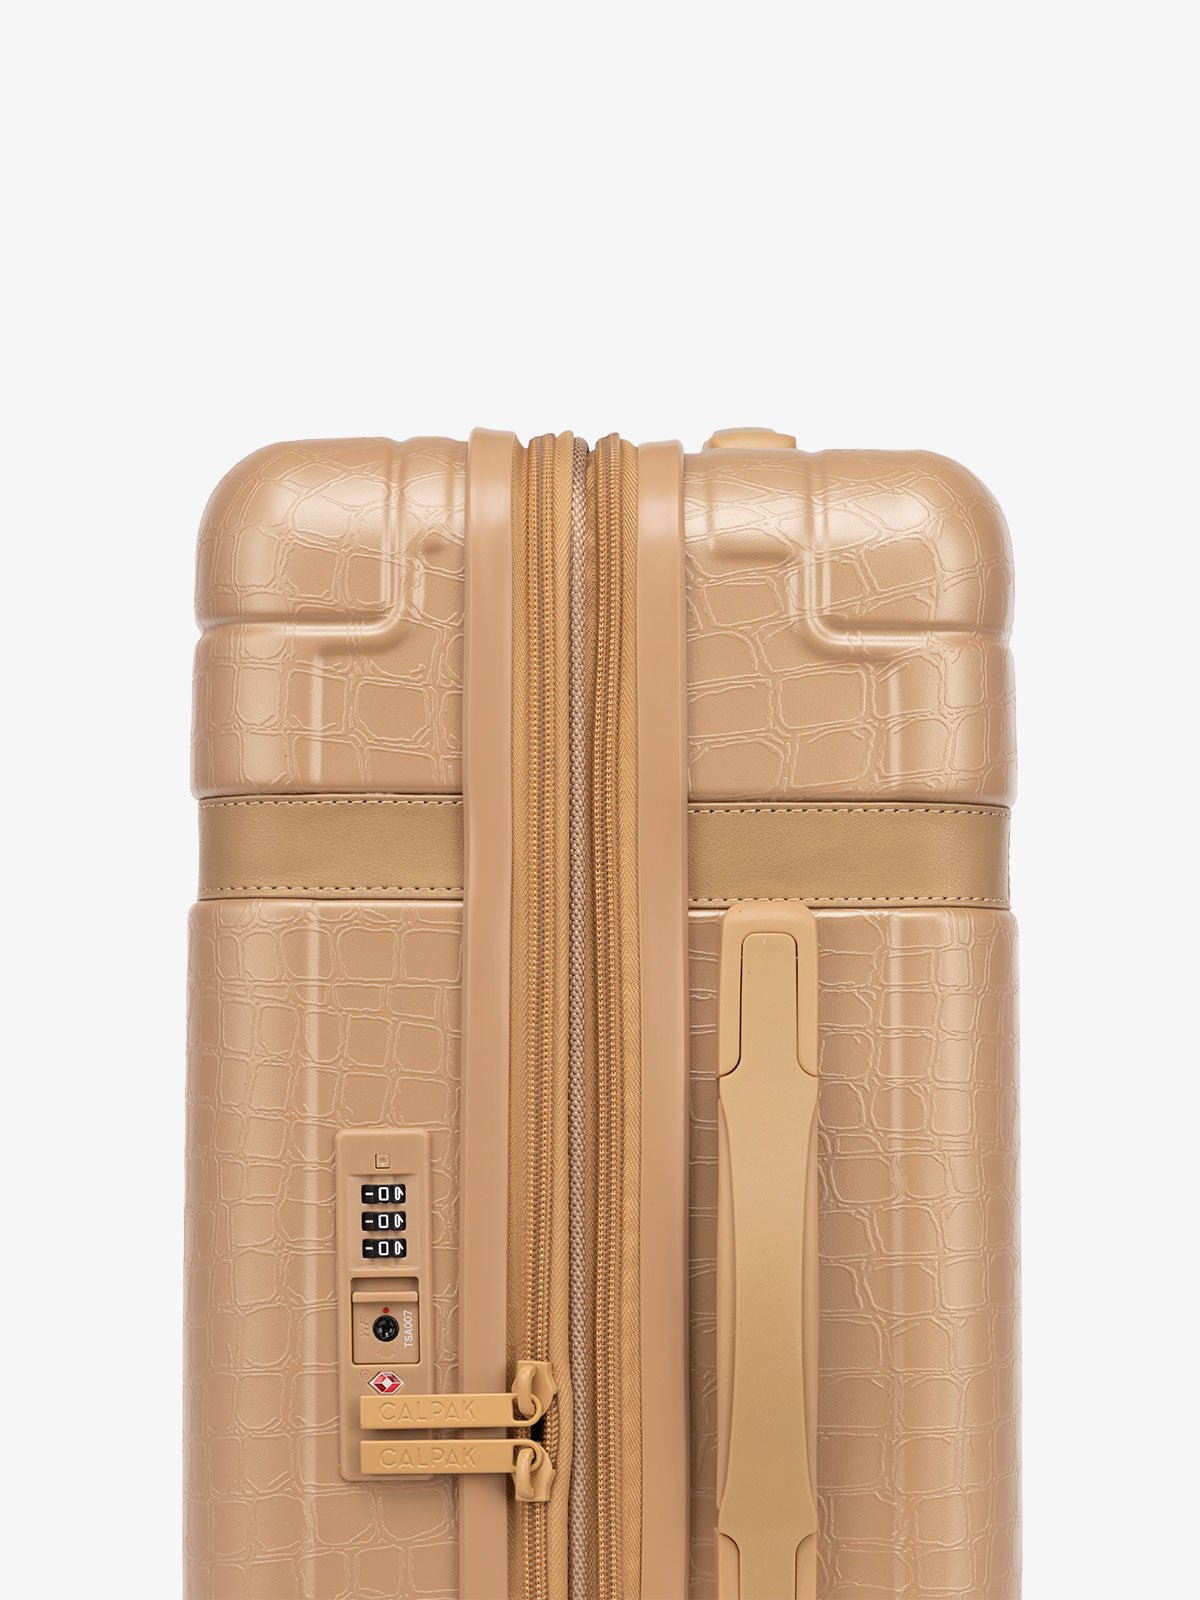 Trnk beige almond 2-piece luggage set with TSA approved locks